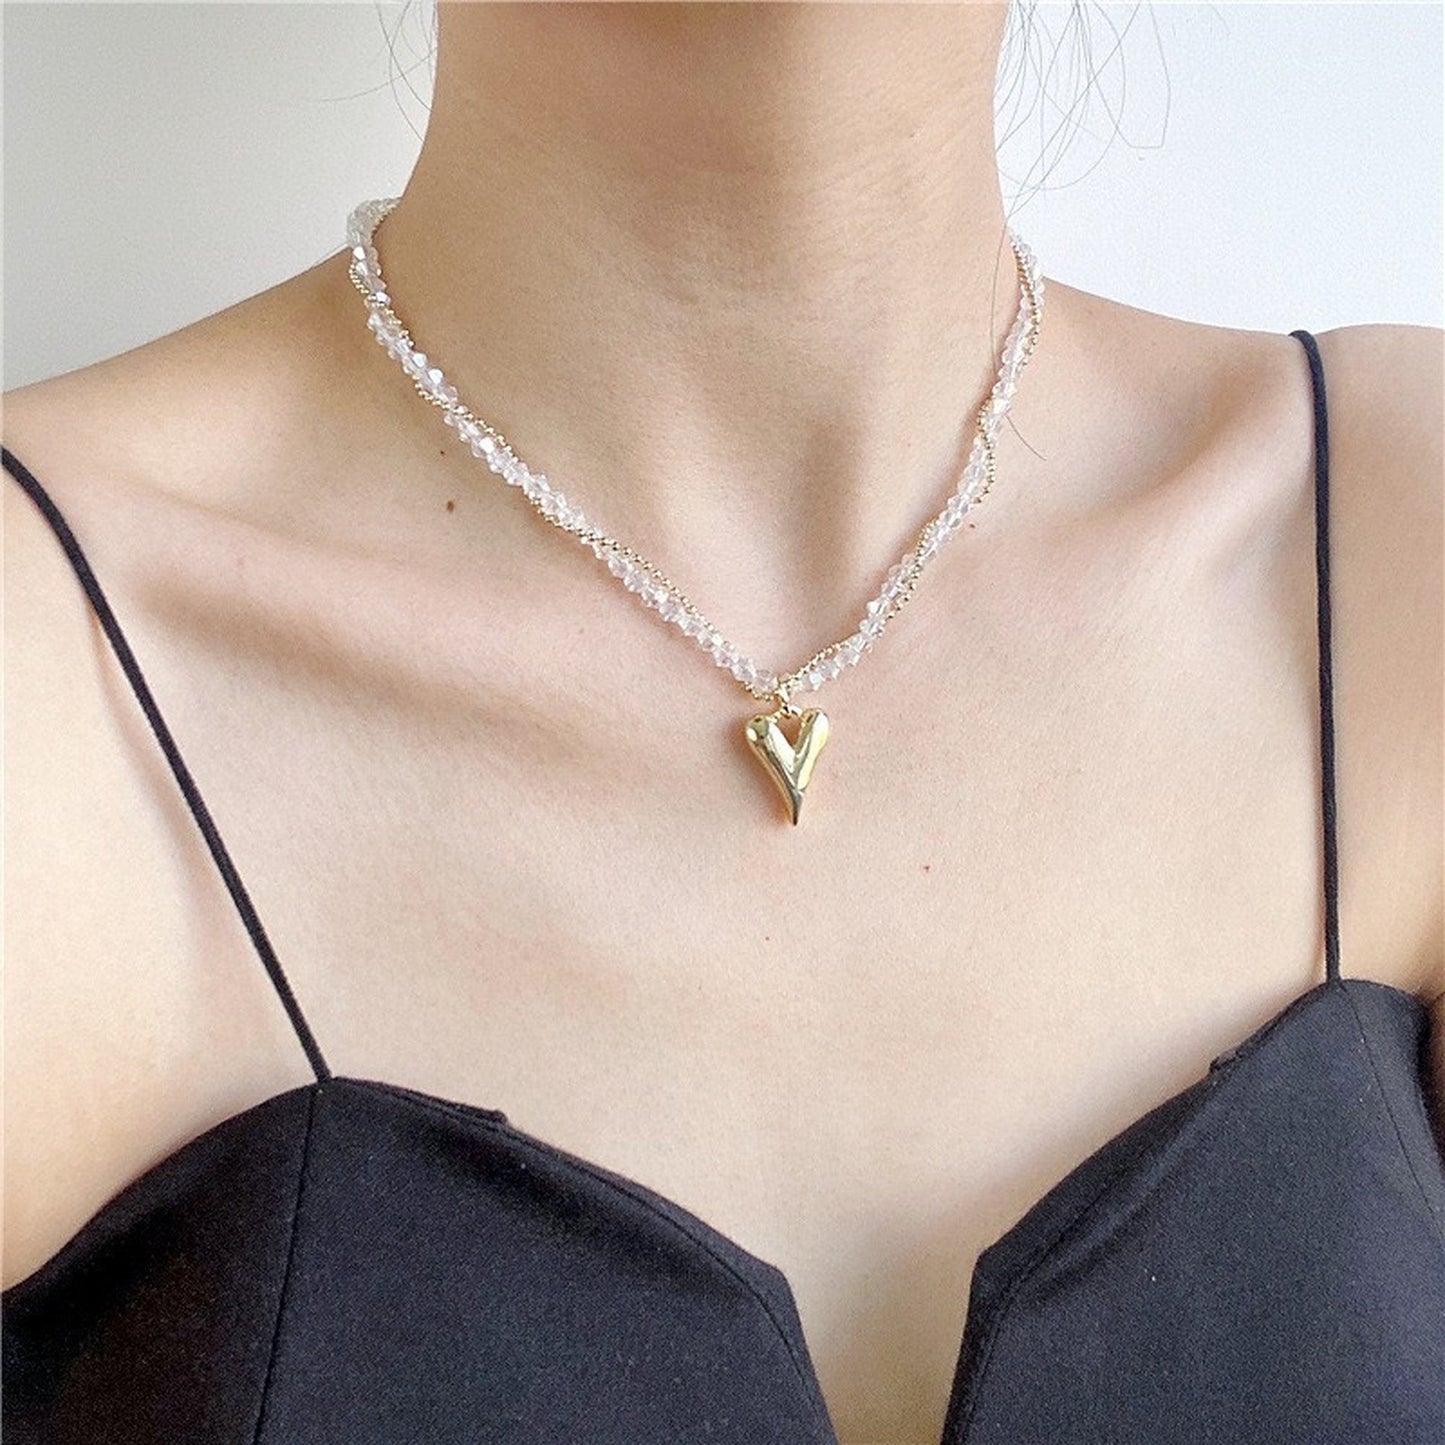 Double Layering Necklace, 2 Strand Twisted Necklace, Gold Heart Pendant, Crystal Necklace, Double Strand Statement Choker, Layering Necklace